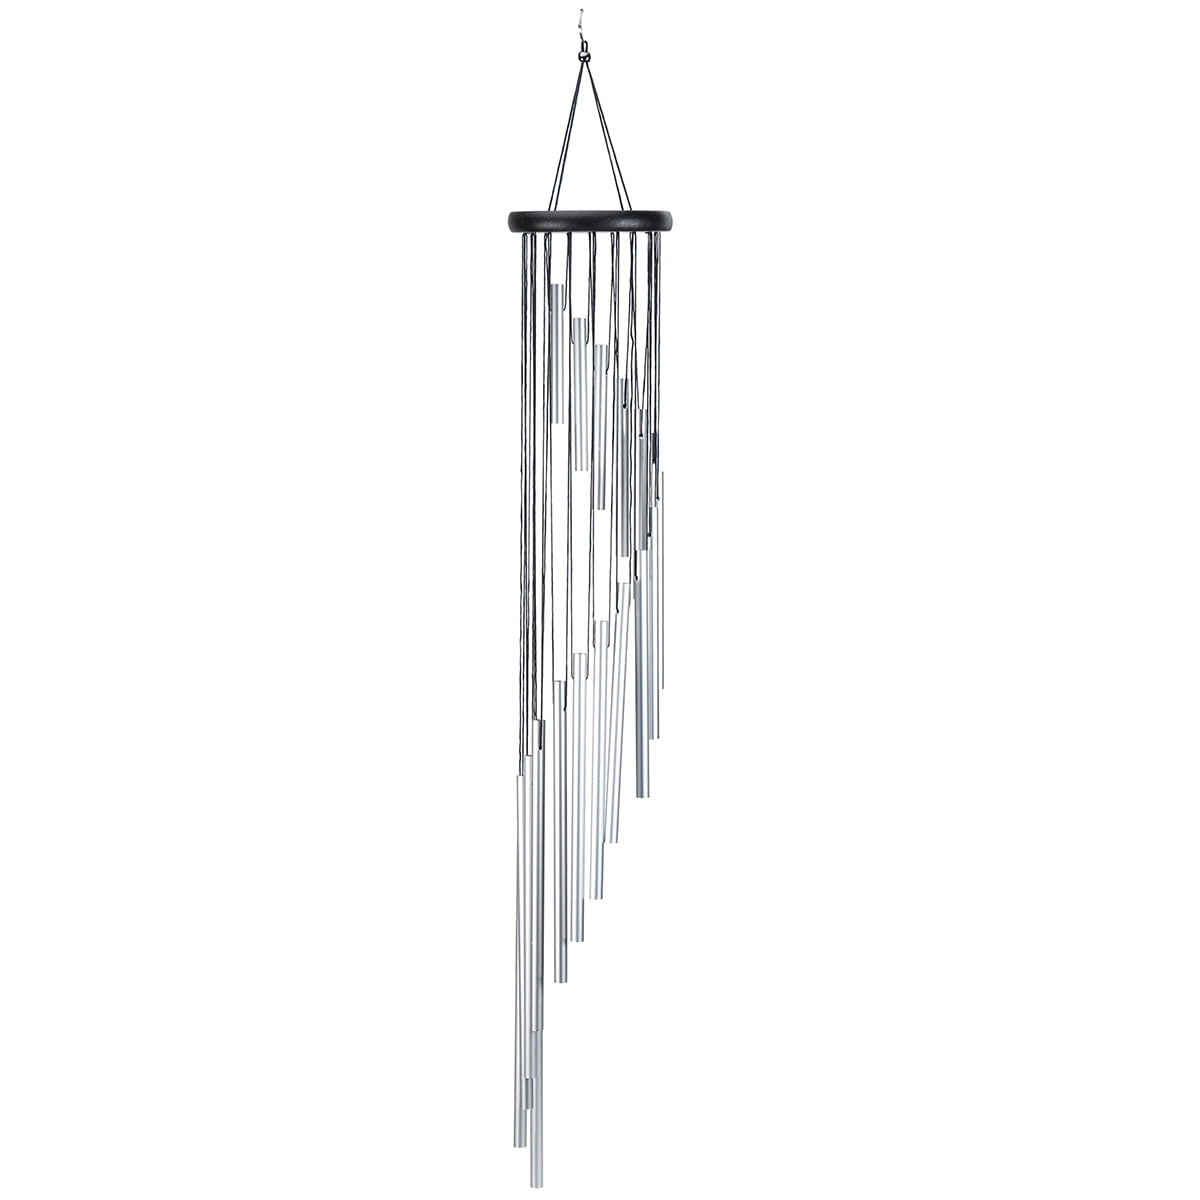 Wind Chimes Outdoor Large Deep Tone Metal Tubes Bells Accessory Hanging Decor 1x